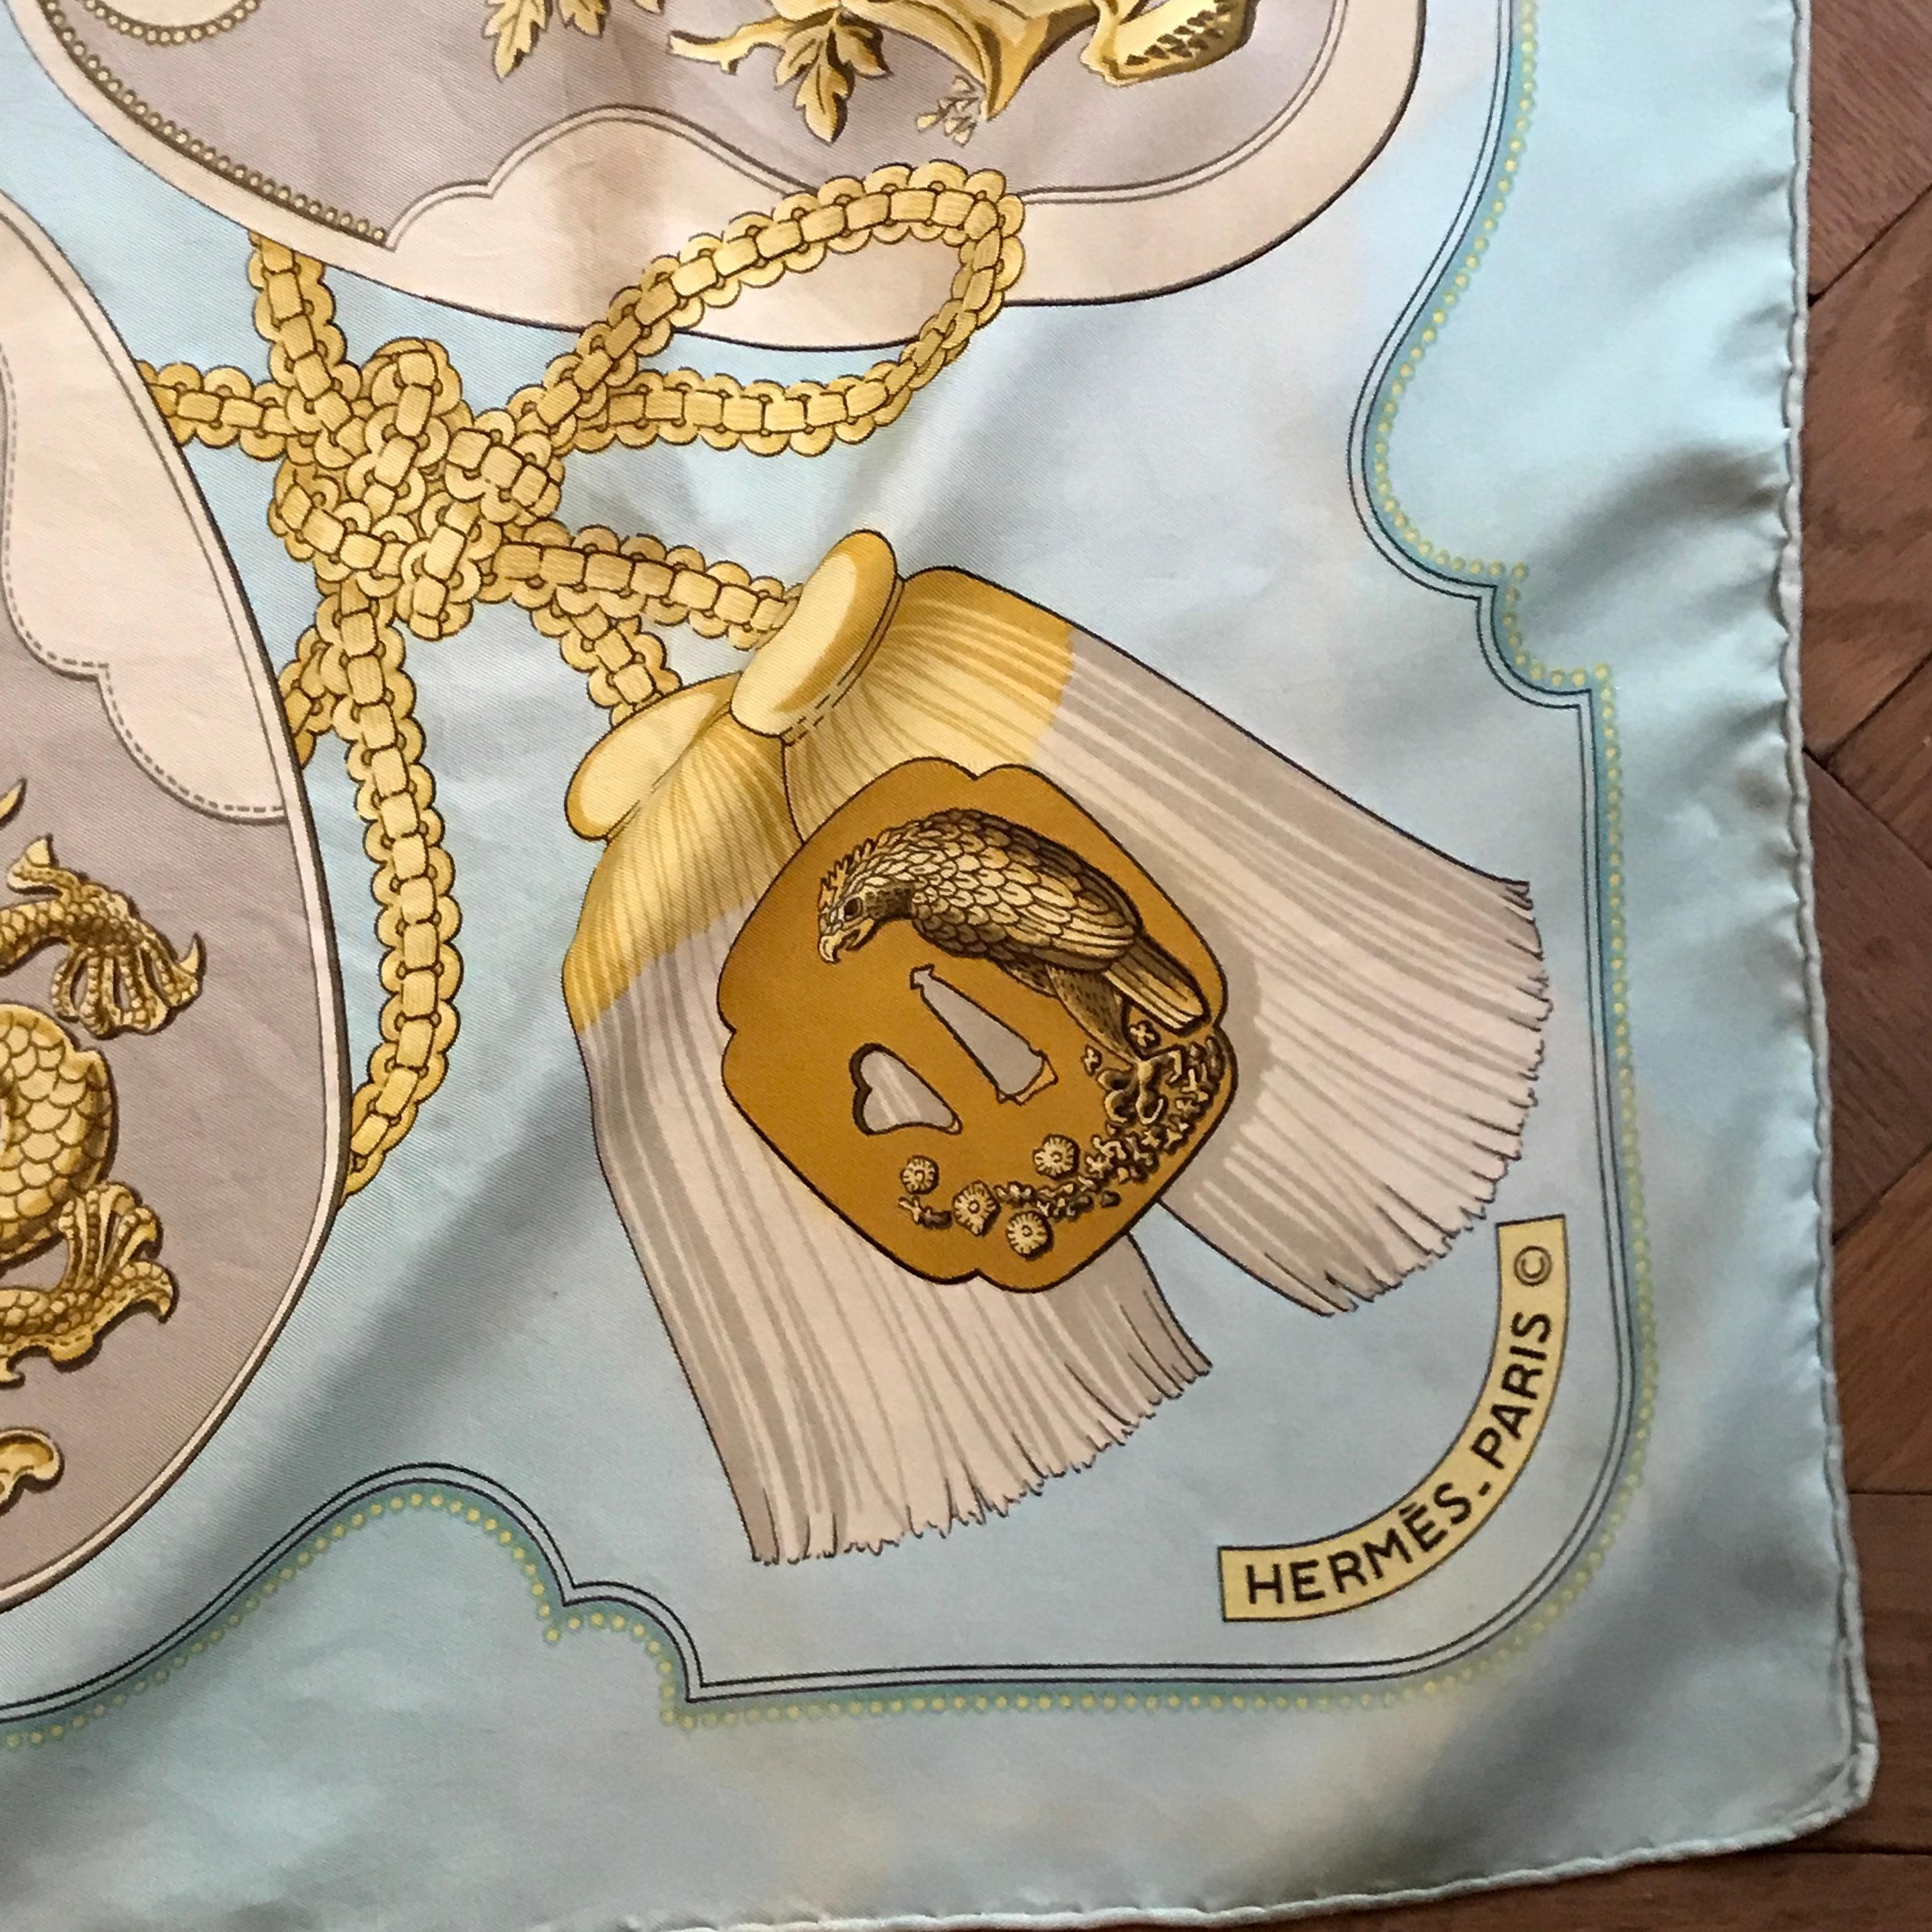 An opportunity to own a rare vintage Hermes scarf pattern 